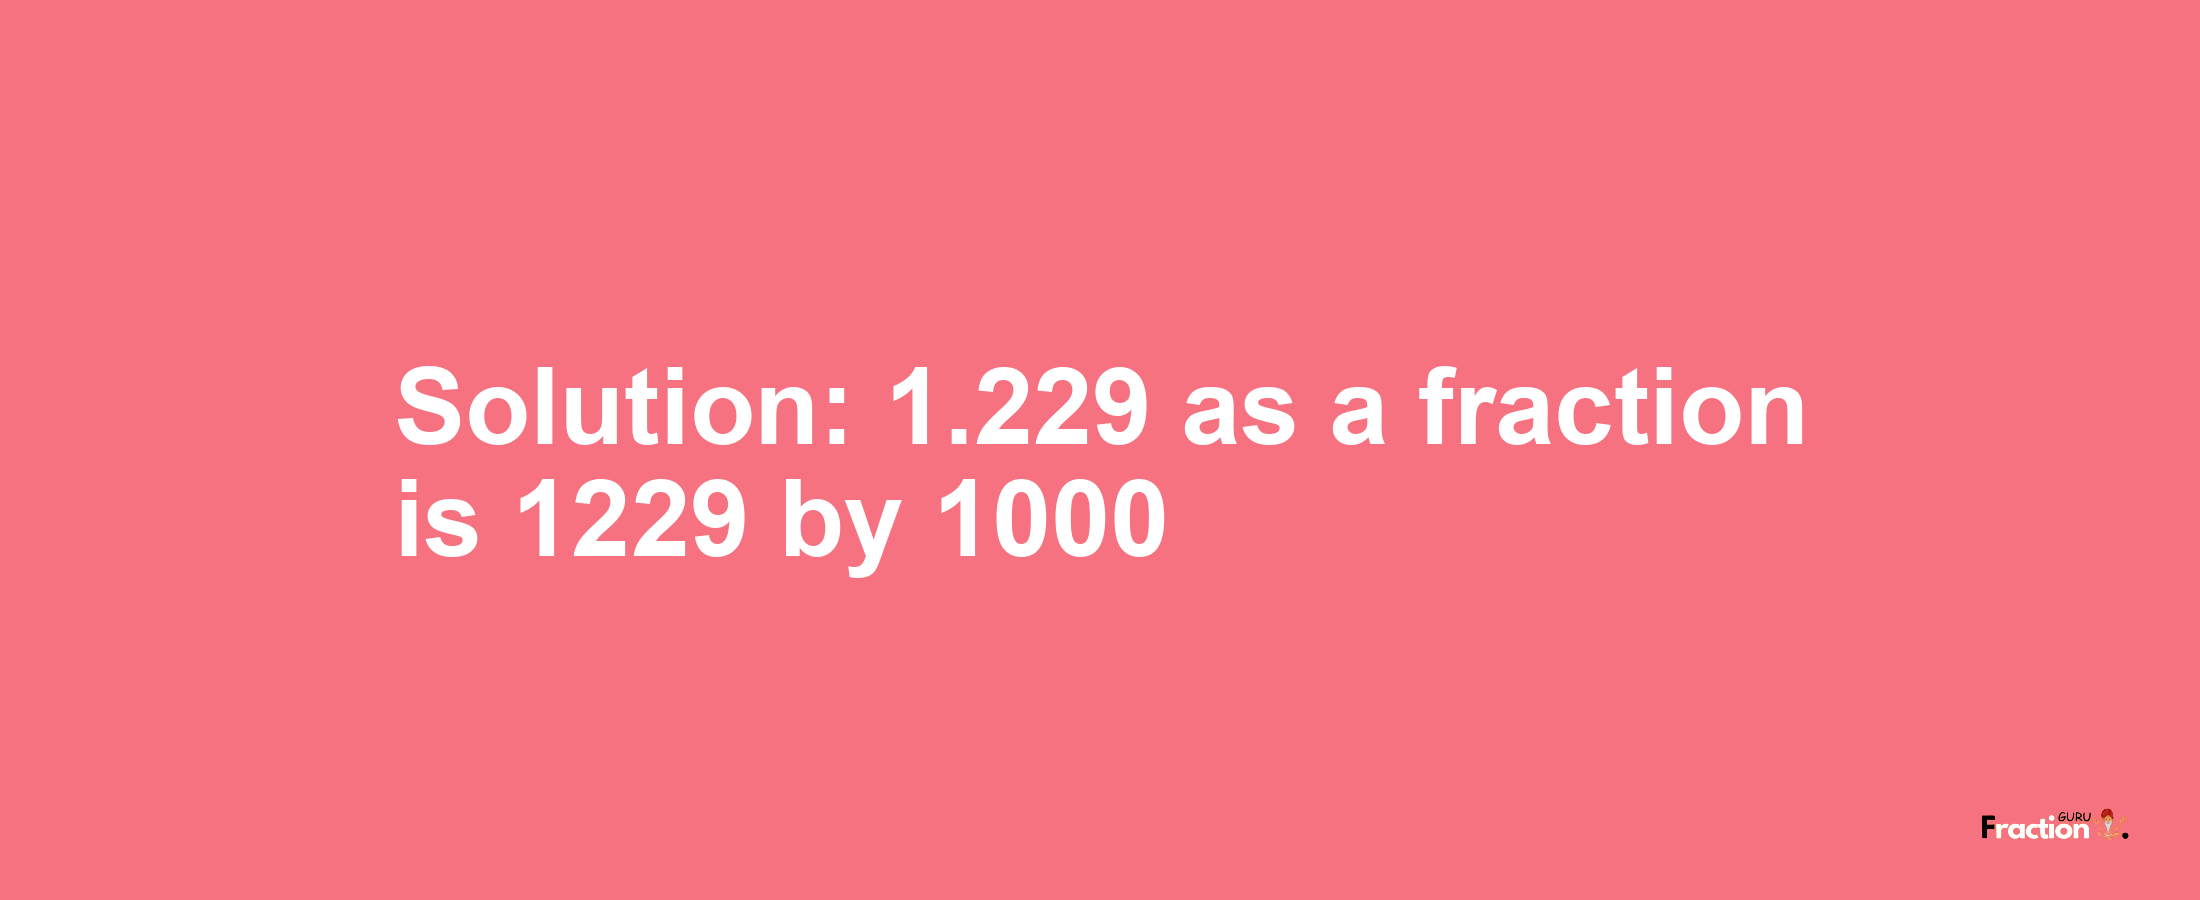 Solution:1.229 as a fraction is 1229/1000